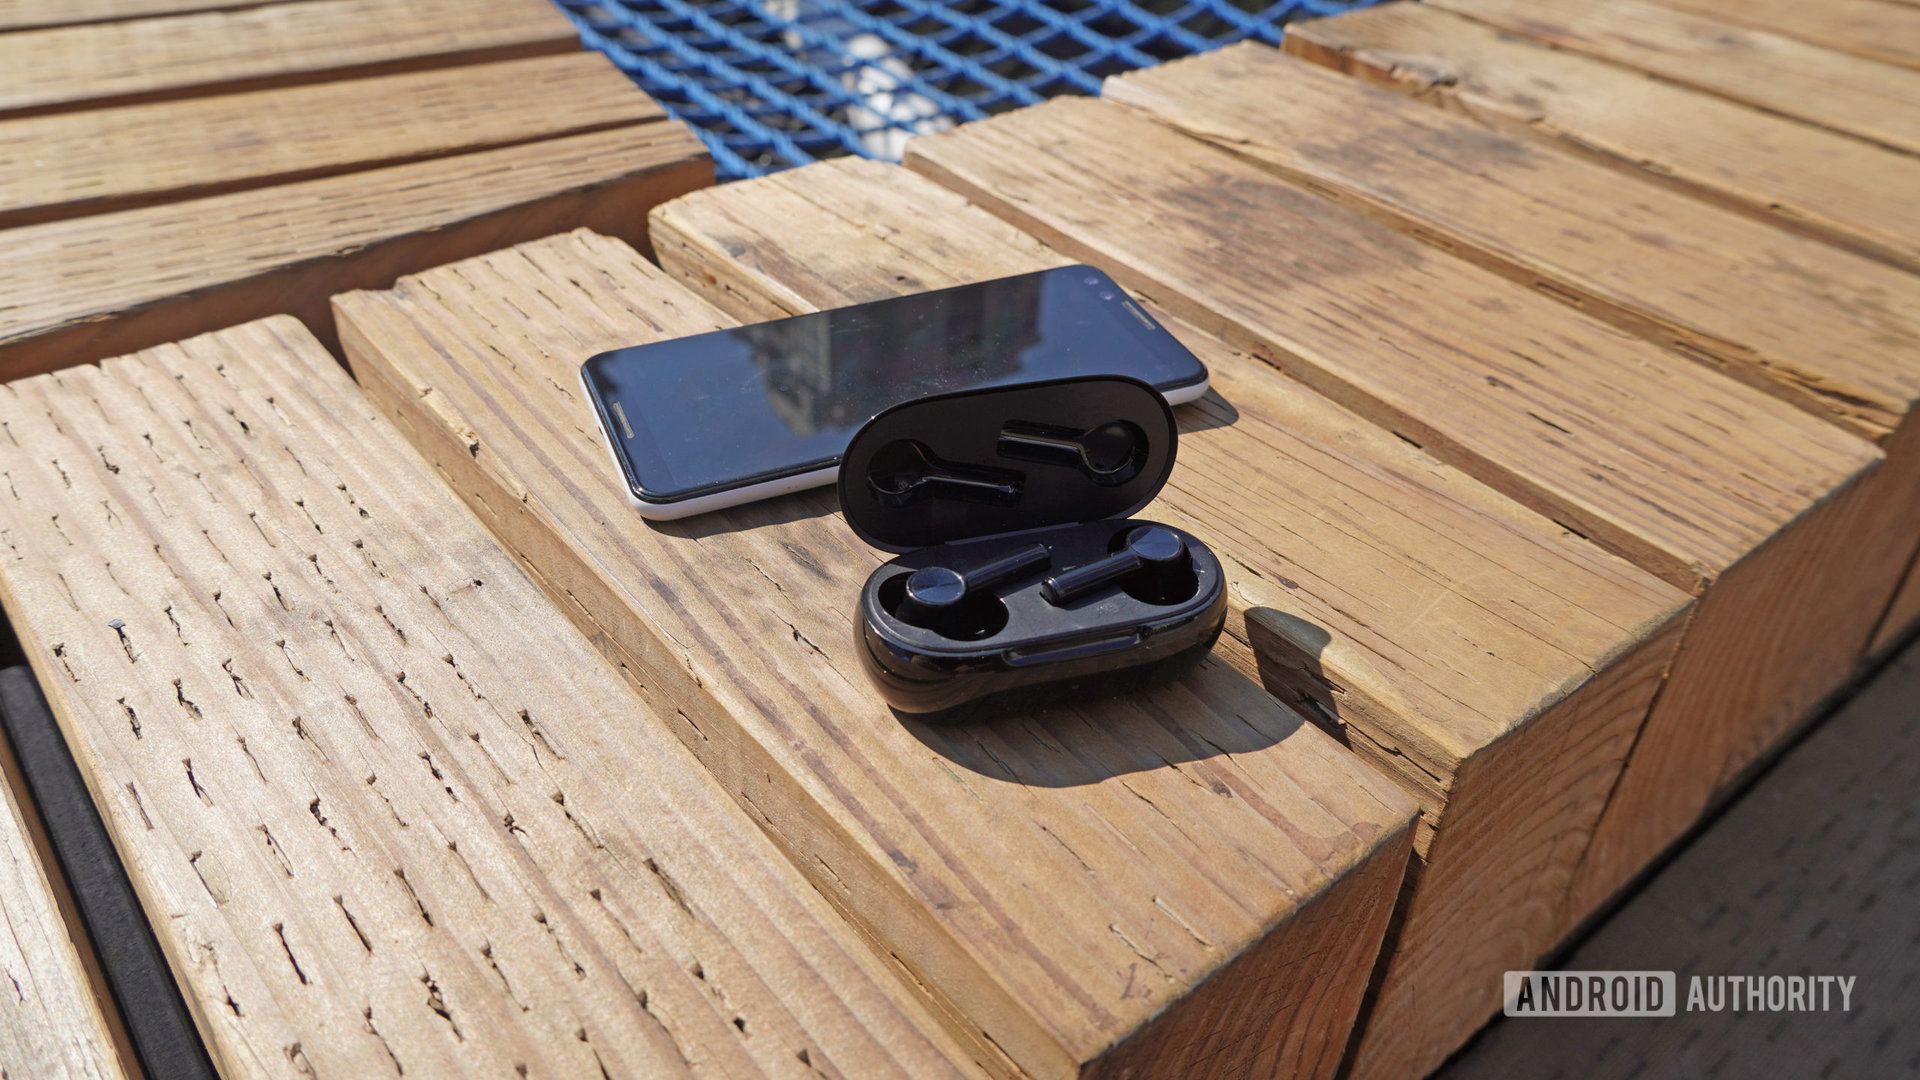 The OnePlus Buds Z2 sitting in their case on a wooden bench next to a phone.